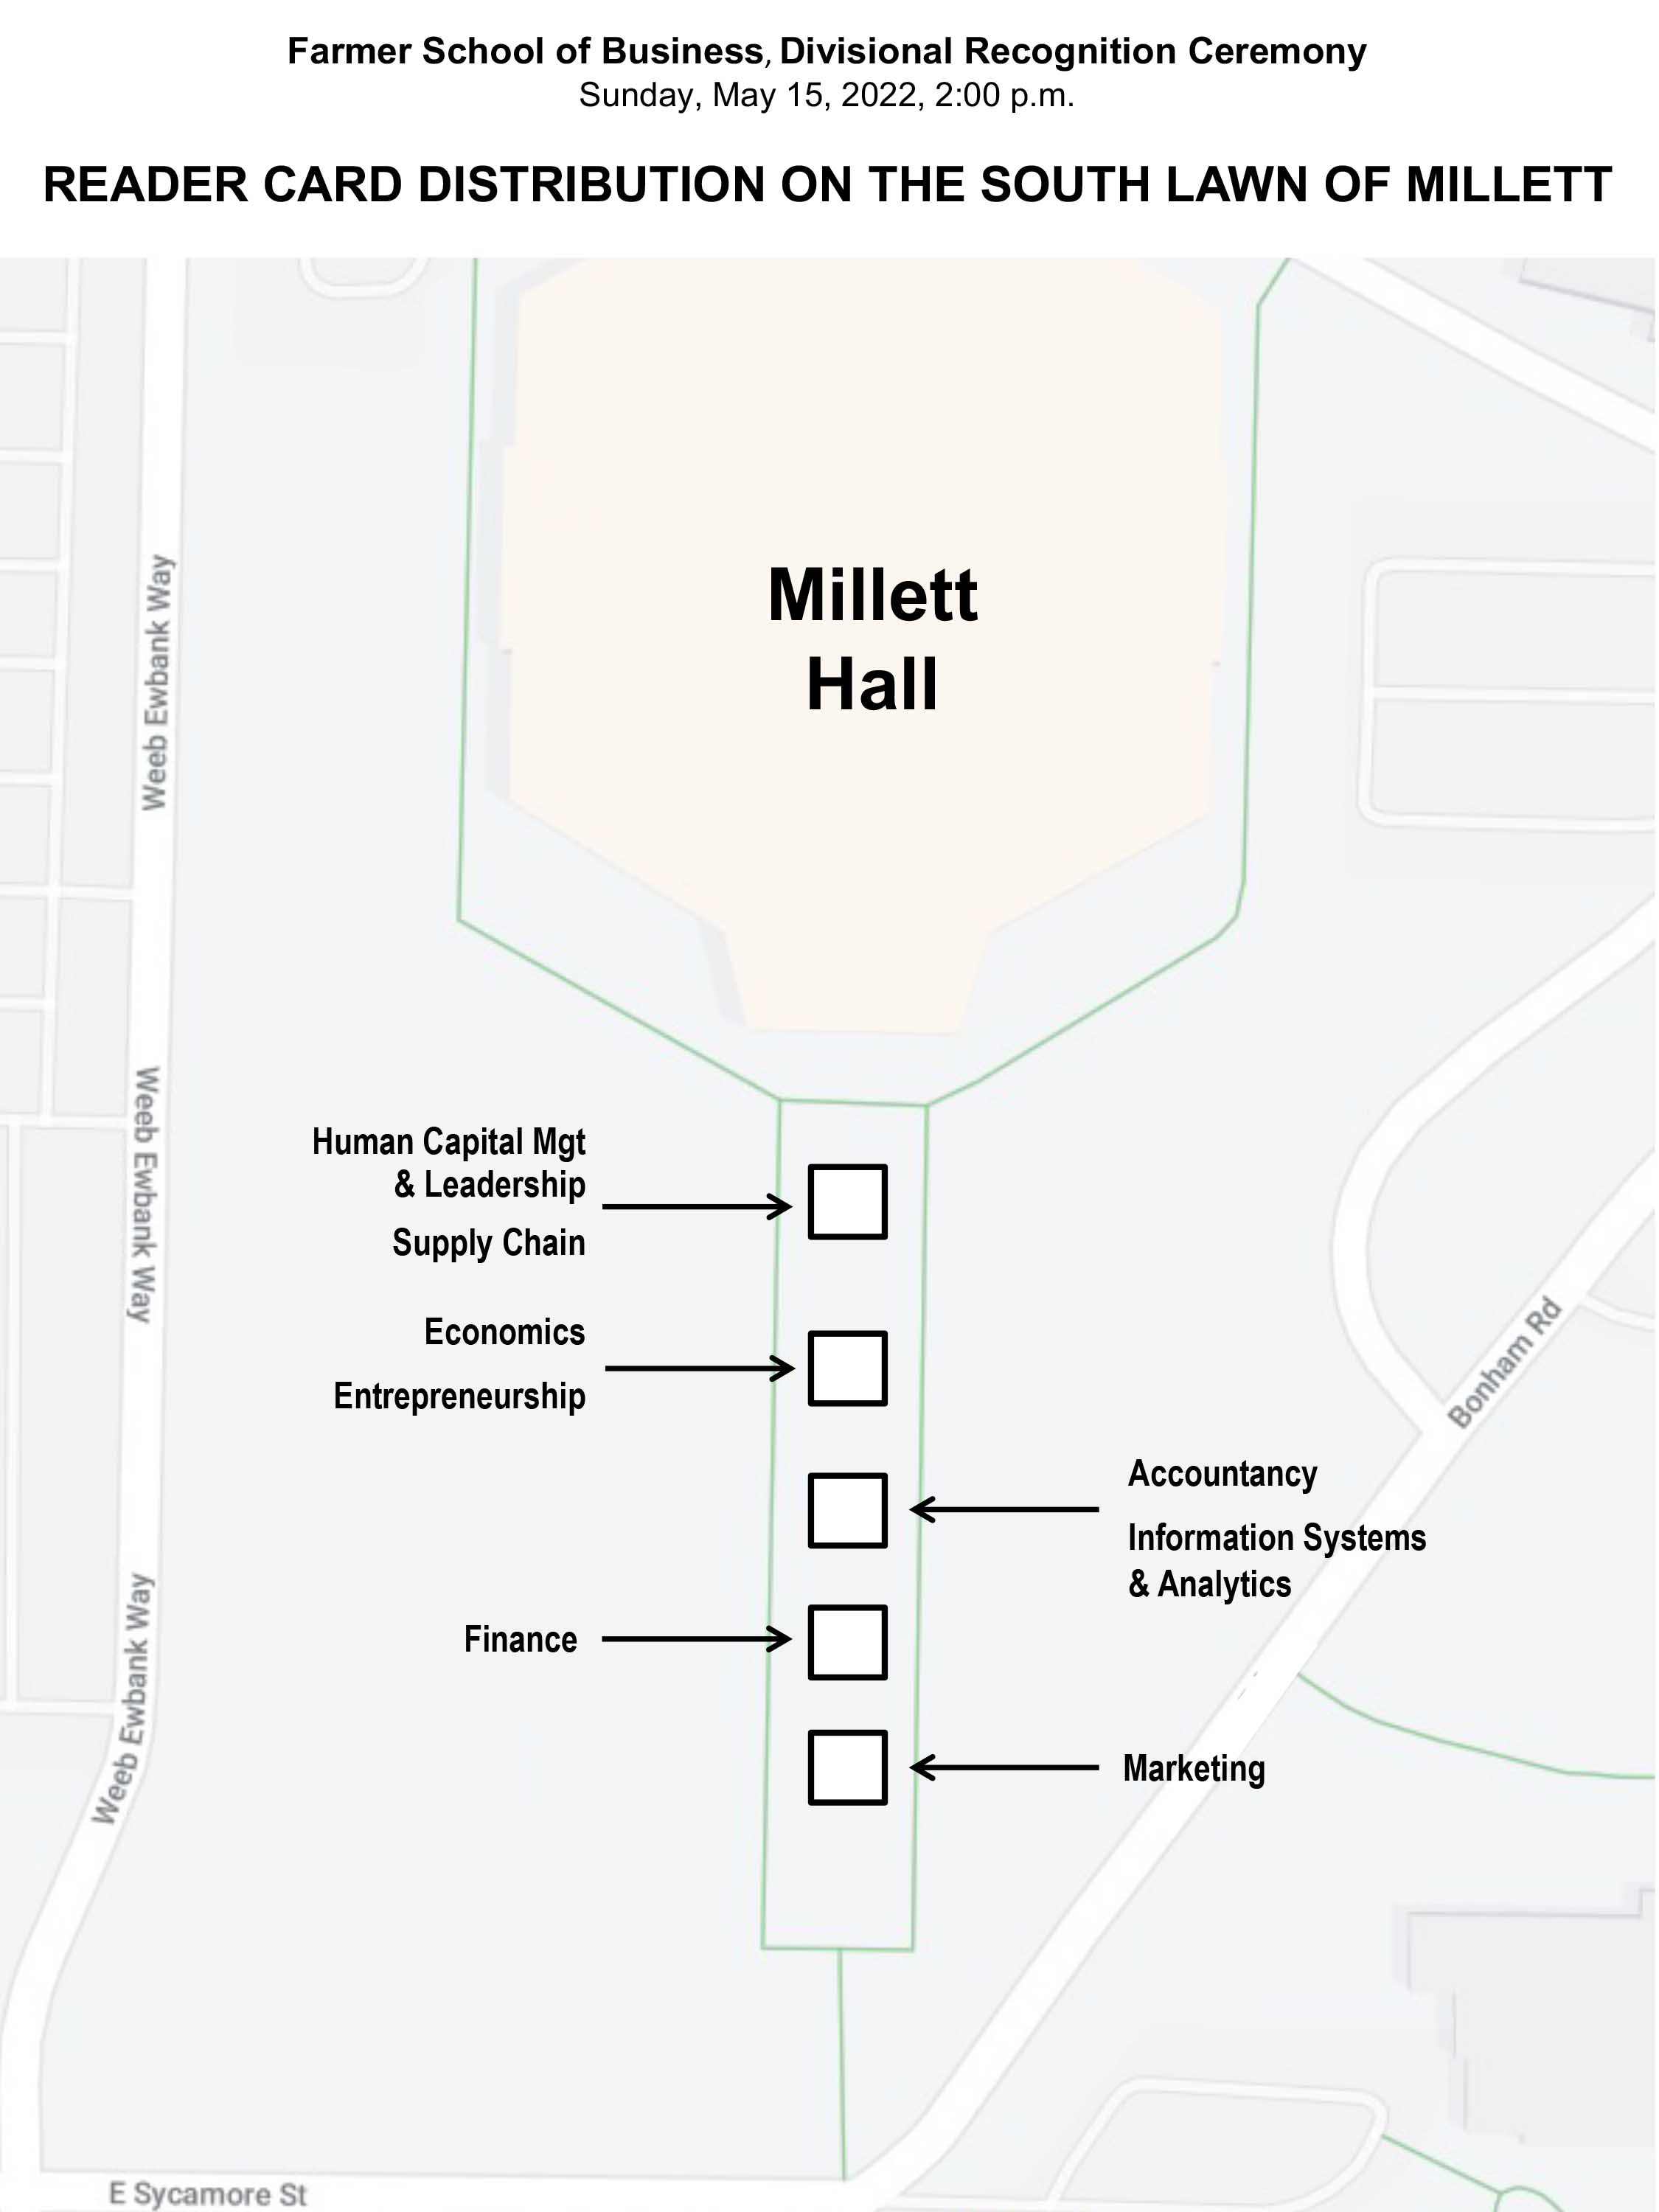 Tent locations for reader card distribution